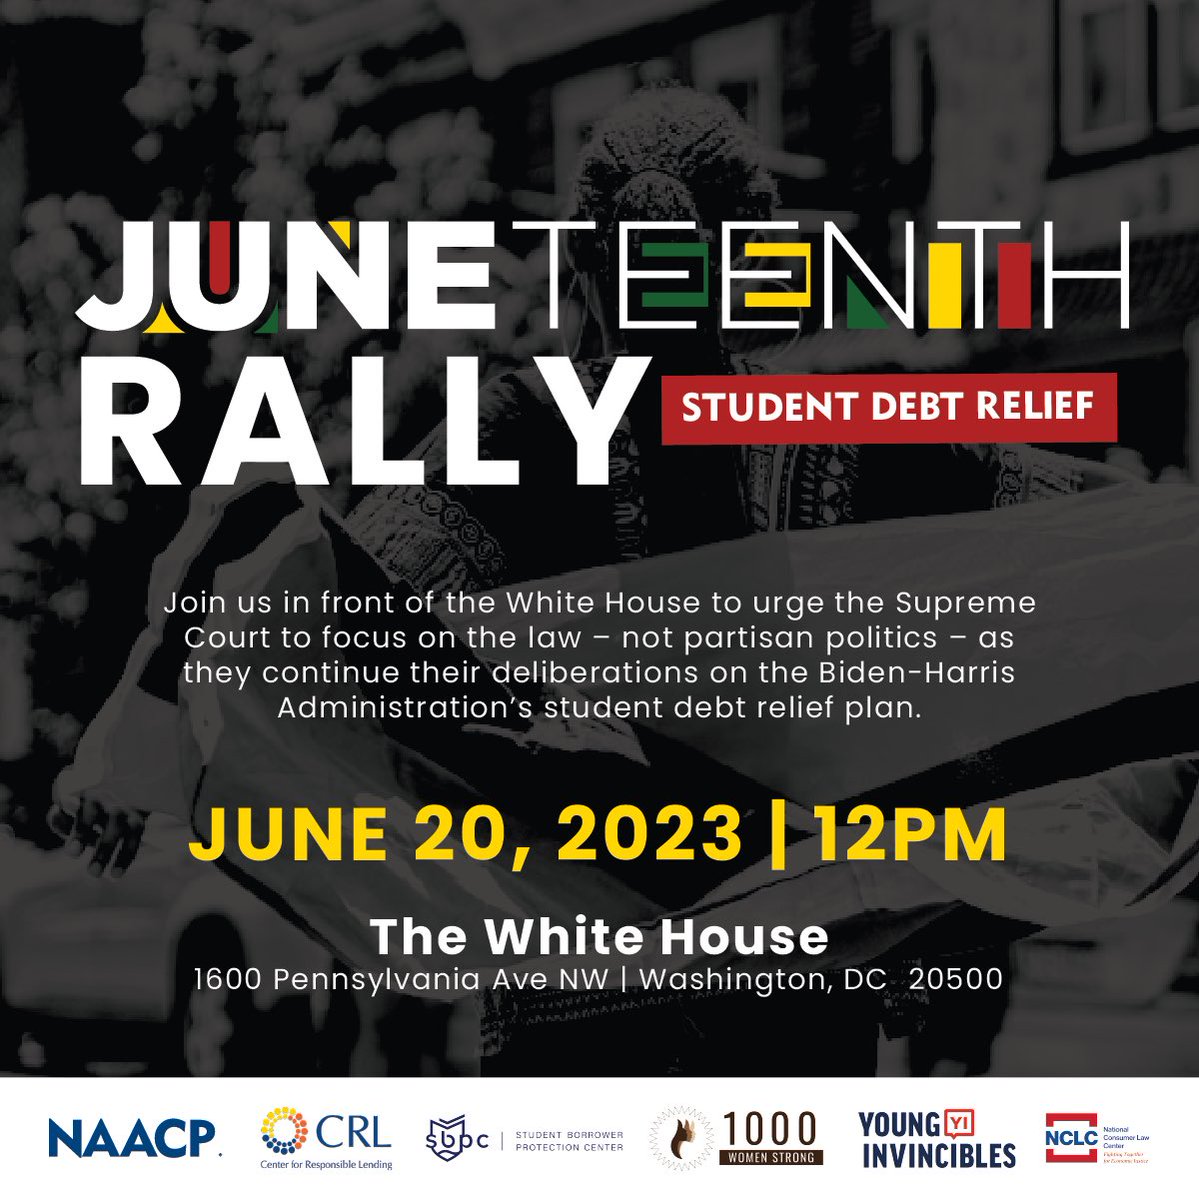 I hope the weekend fills Black folks with joy and peace as we celebrate #Juneteenth! And when we get back on Tuesday, ima need y’all to bring all that energy to the #WhiteHouse for the #Juneteenth Rally!

We’re making it clear that #studentdebtcancellation must happen!